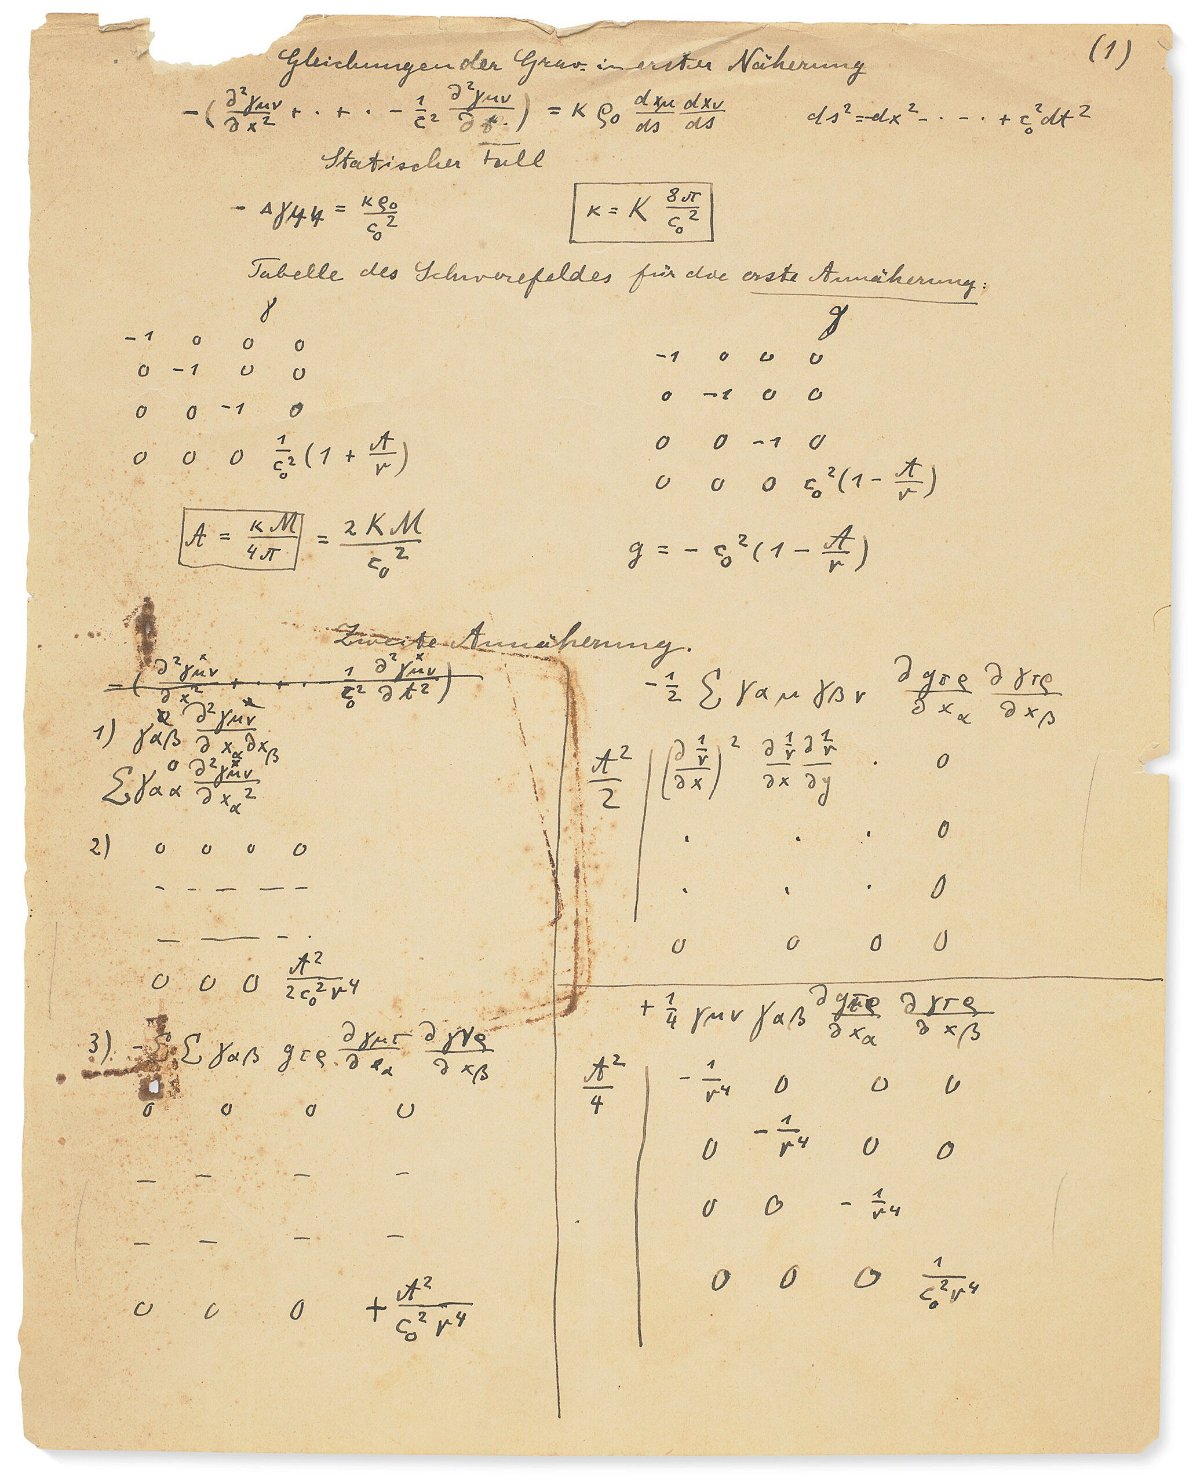 <i>Courtesy Christie's/Aguttes</i><br/>Einstein's and Besso's calculations are documented in the manuscript.